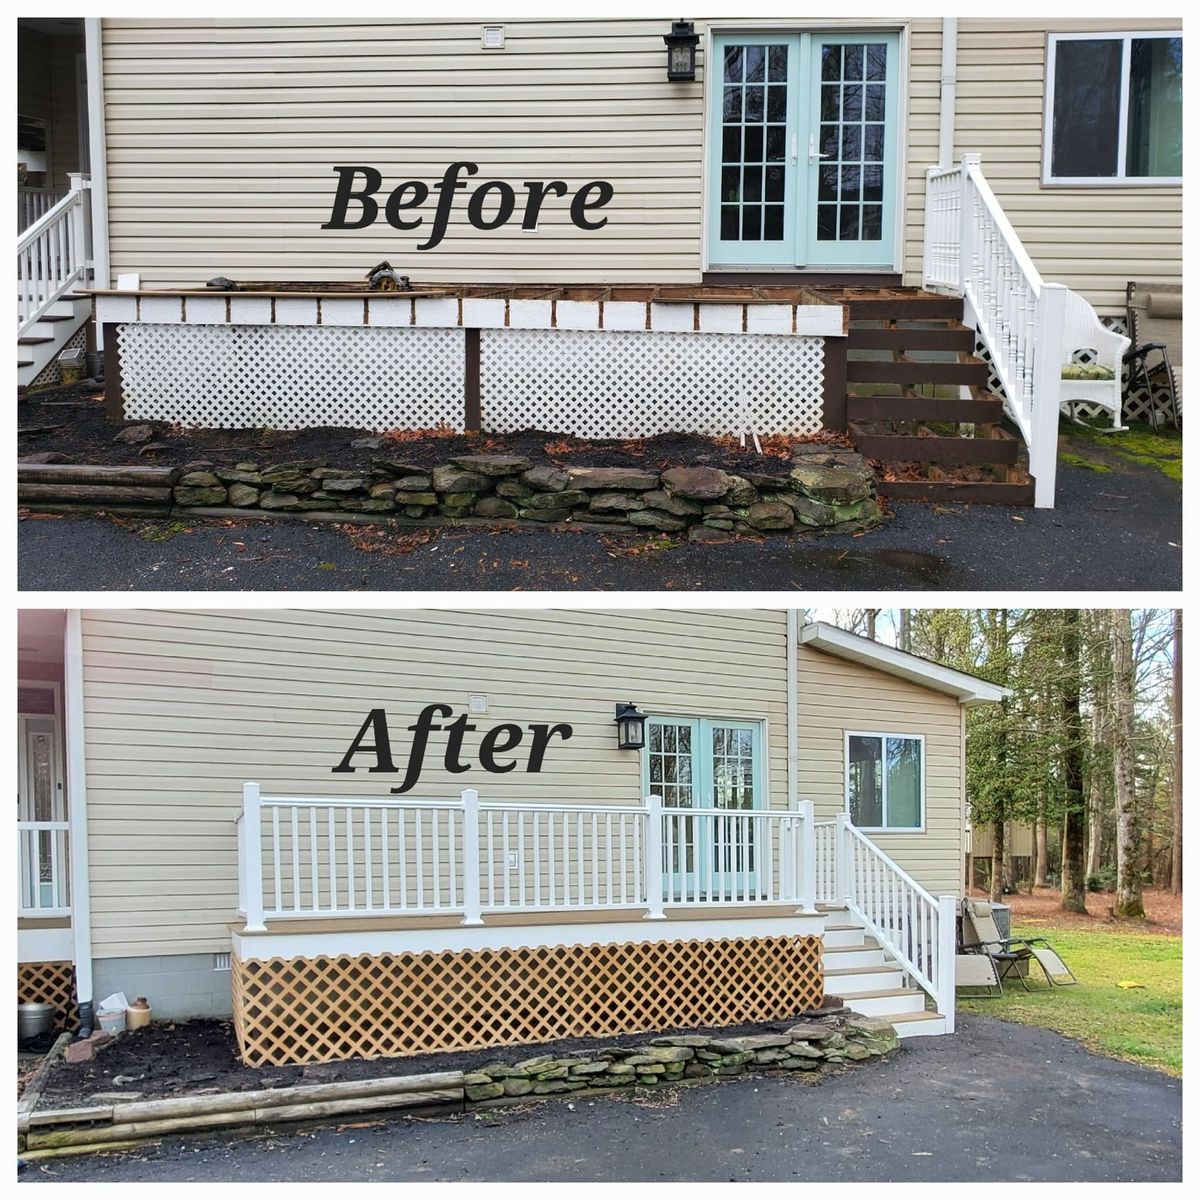 Deck & Patio Installation for Walters Professional Painting & Home Improvements LLC in Frankford, Delaware